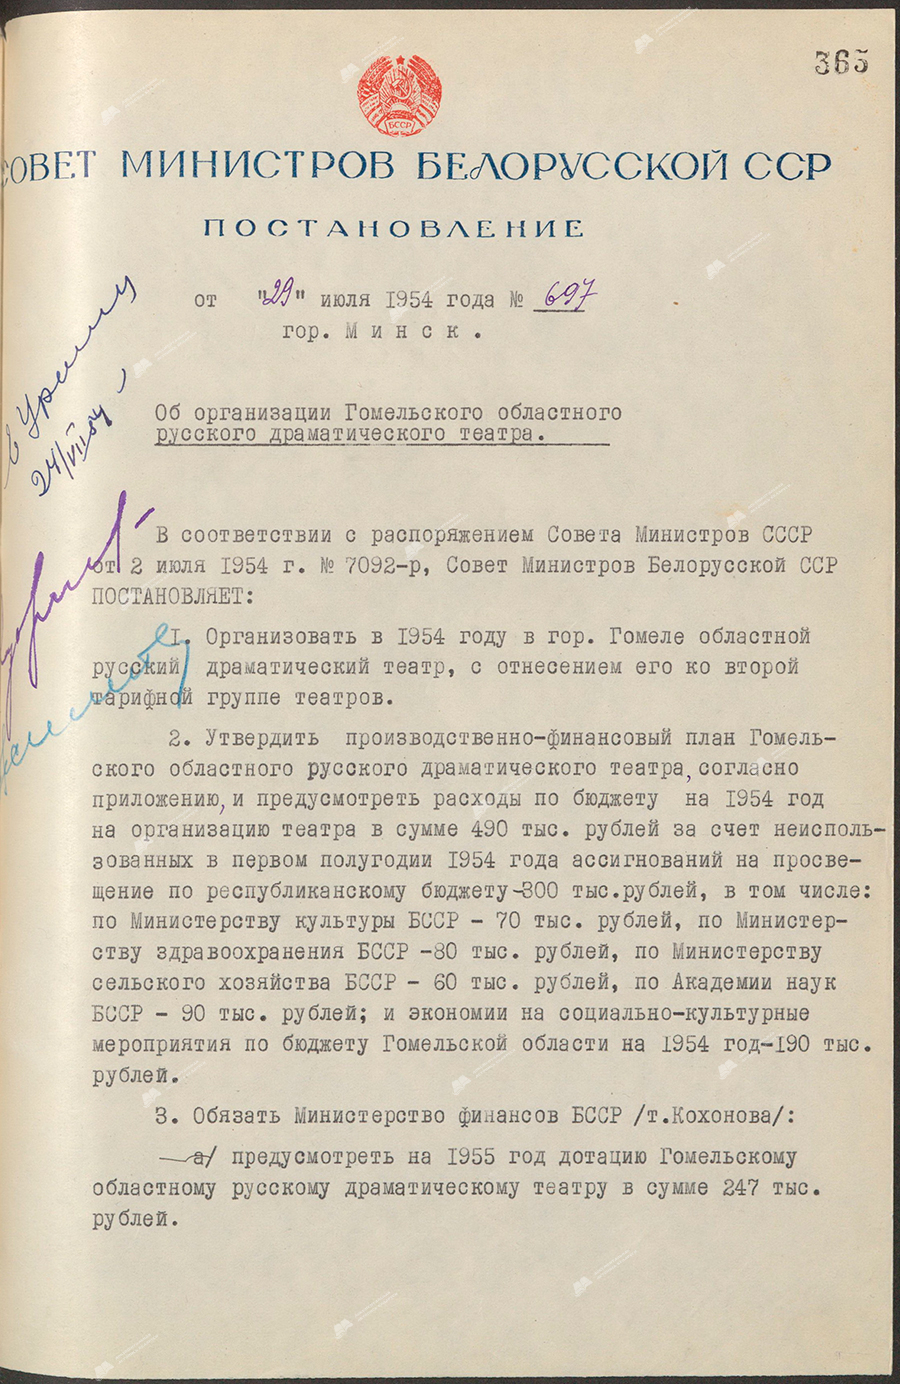 Resolution No. 697 of the Council of Ministers of the Byelorussian SSR «On the organization of the Gomel Regional Russian Drama Theater»-стр. 0